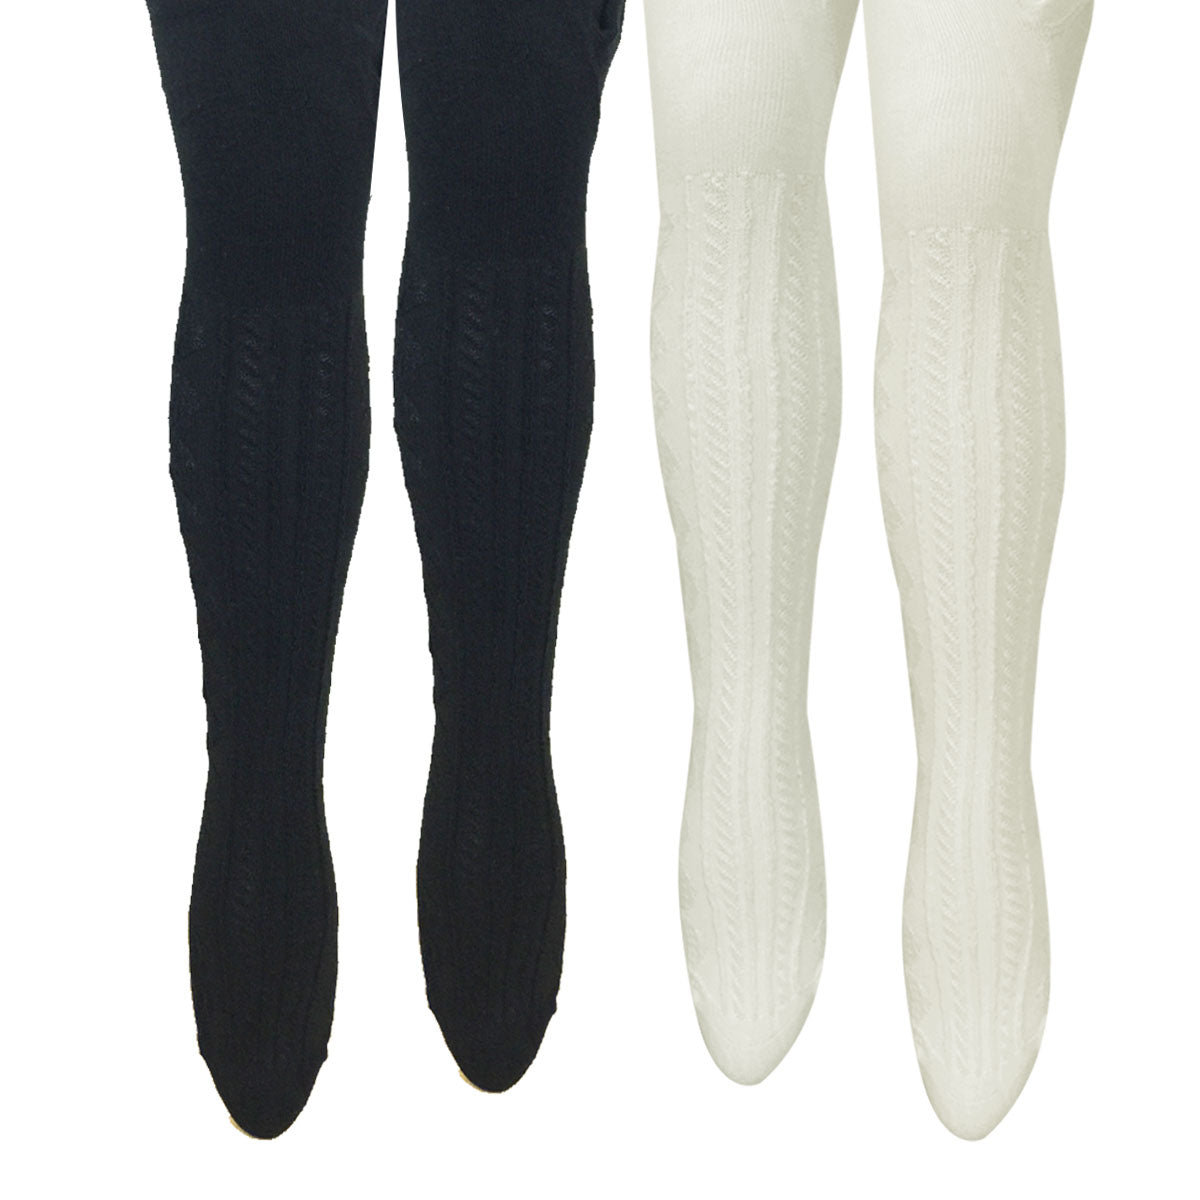 Wrapables Warm Cable Knit Tights for Toddler Girls (Set of 2)